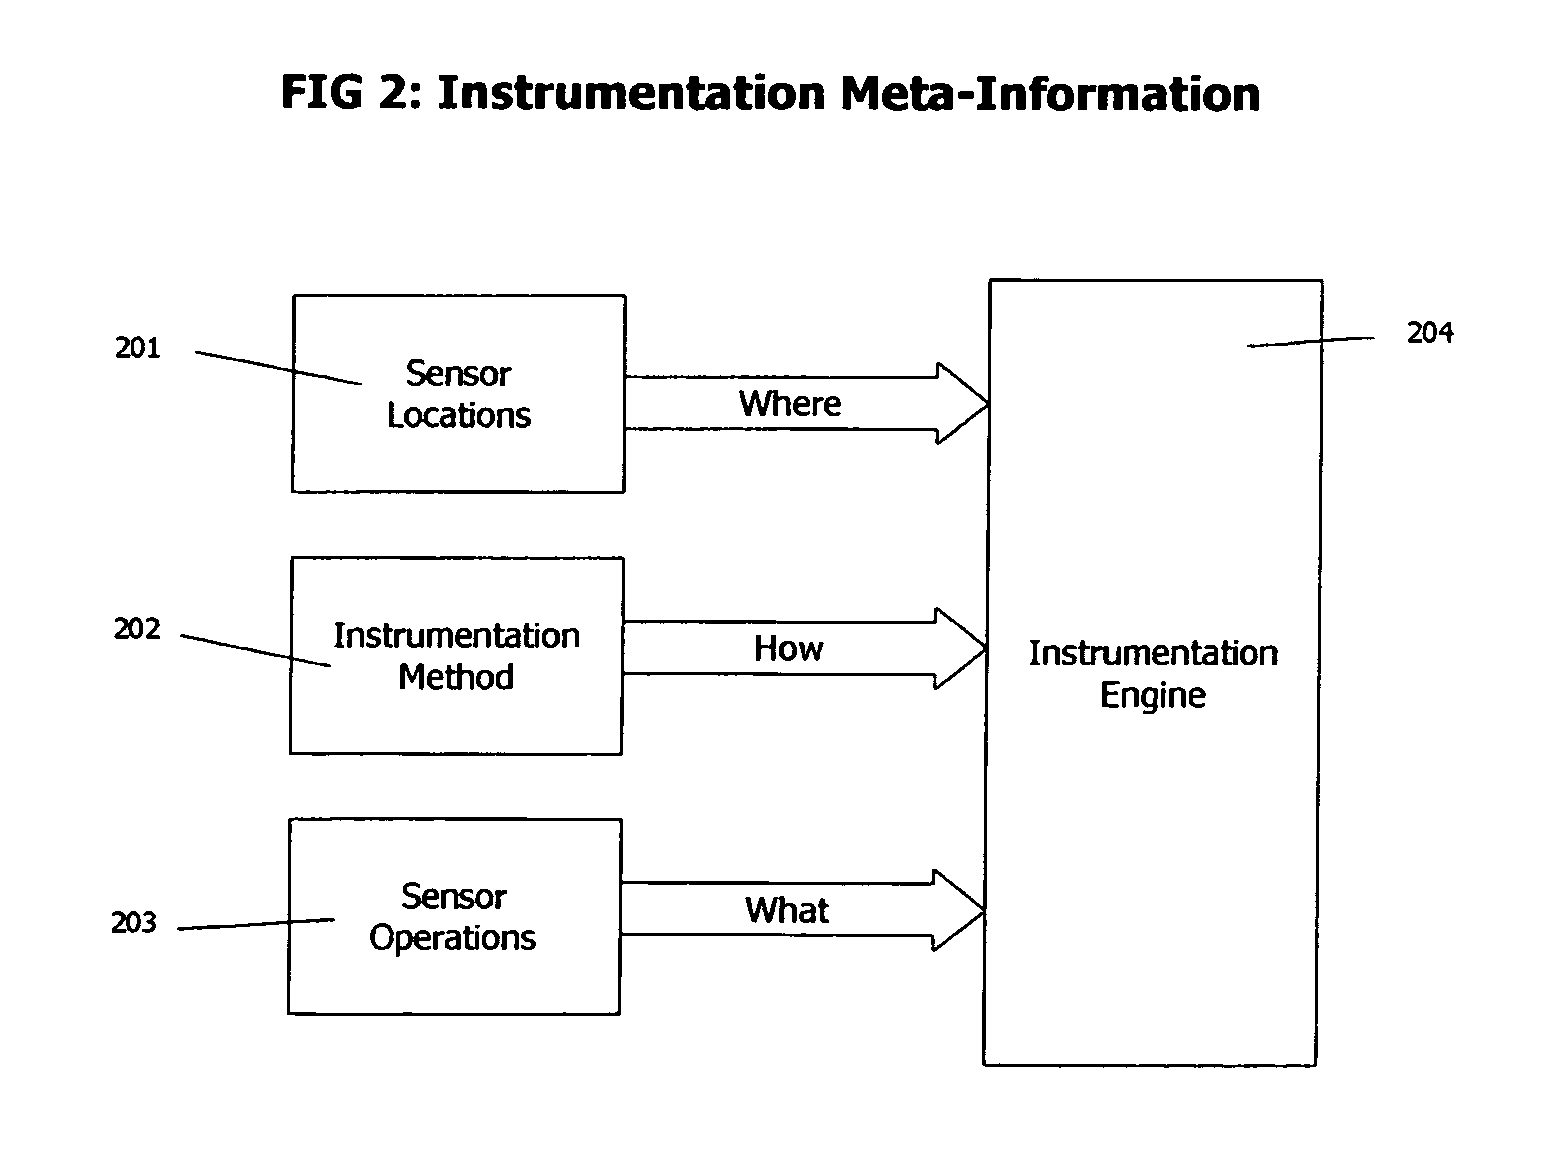 Method and system for automated analysis of the performance of remote method invocations in multi-tier applications using bytecode instrumentation